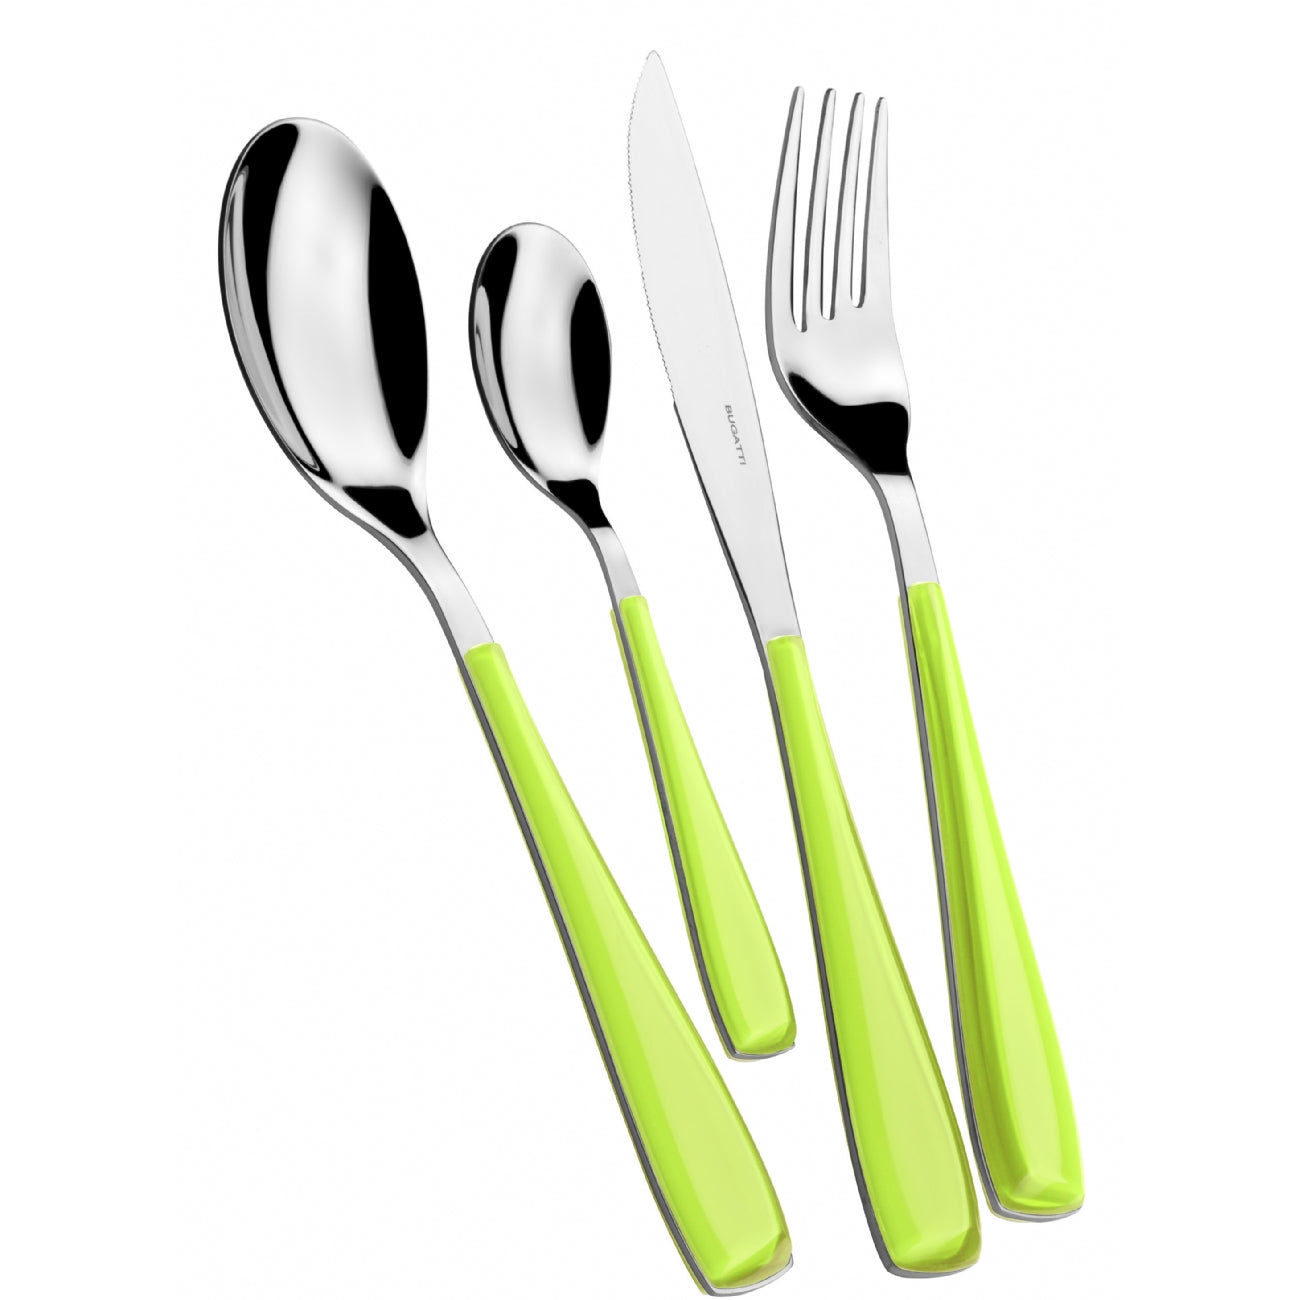 BUGATTI, Essenza, 24 Piece Cutlery Set in 18/10 Stainless Steel and Apple Green Color Handle. Cutlery Set for 6 People Consisting of 6 Spoons, 6 Forks, 6 Knives and 6 Coffee Spoons